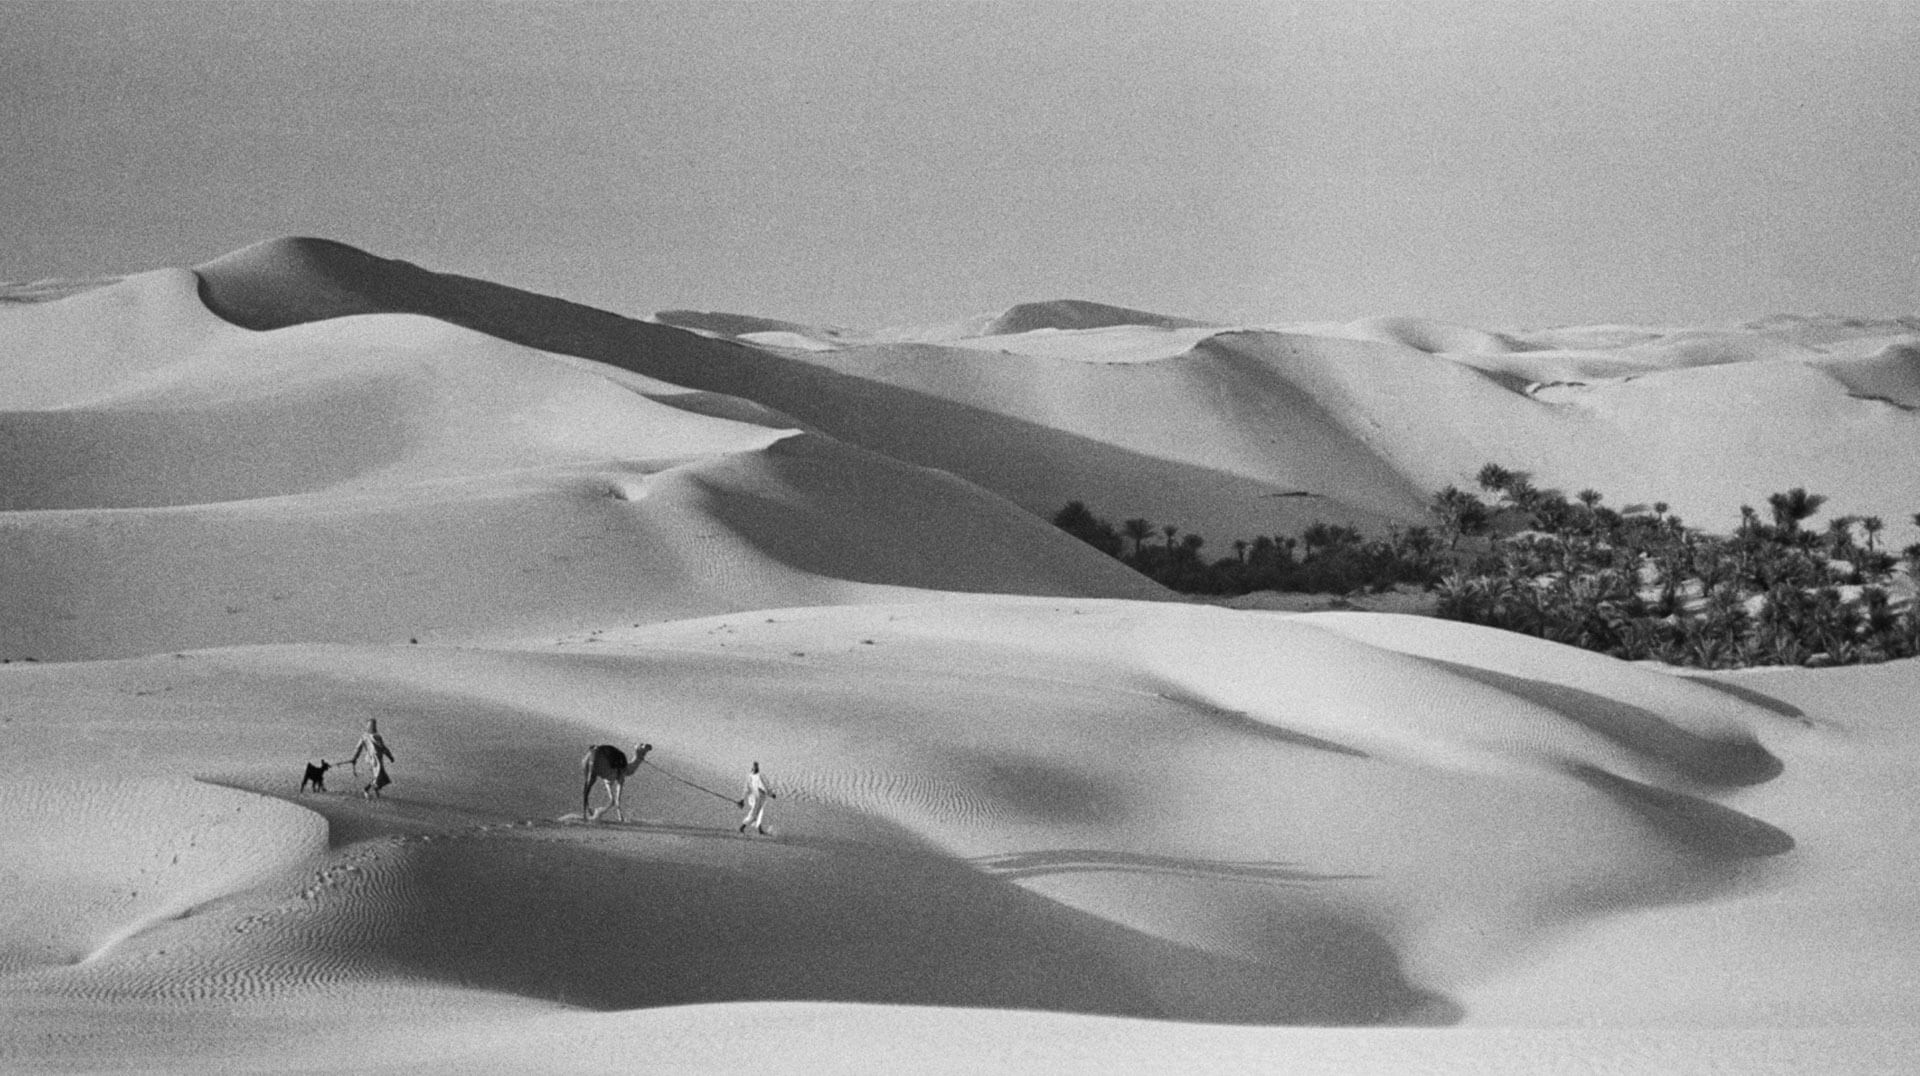 A black and white desert landscape featuring a camel, a saluki dog and 2 people from the mid 20th century. 